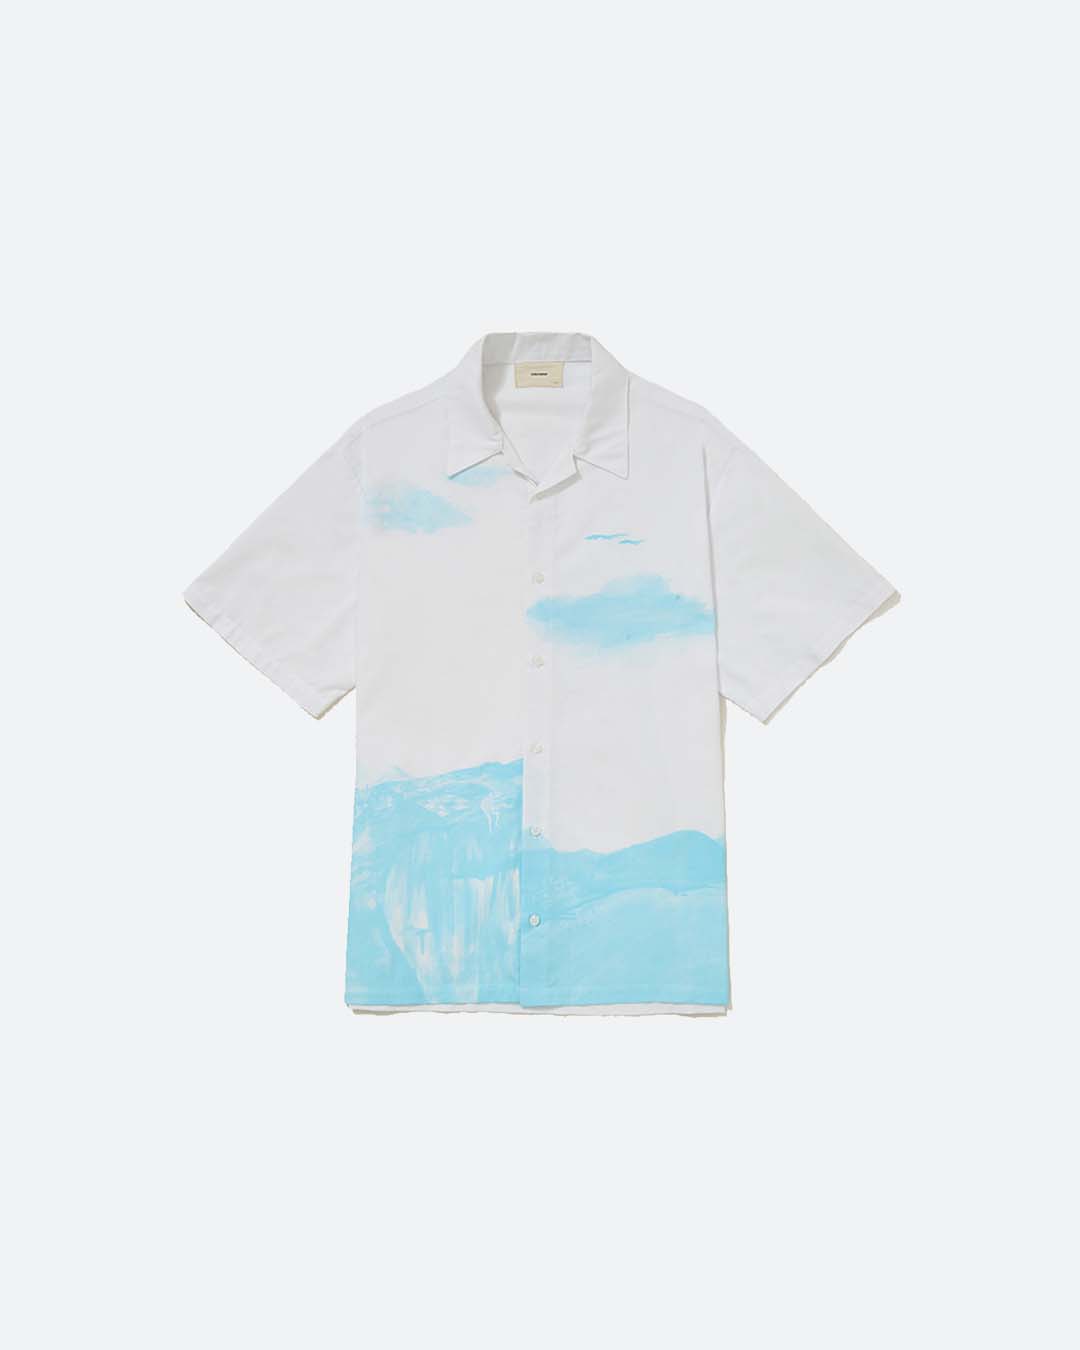 Cliff Painting Shirt